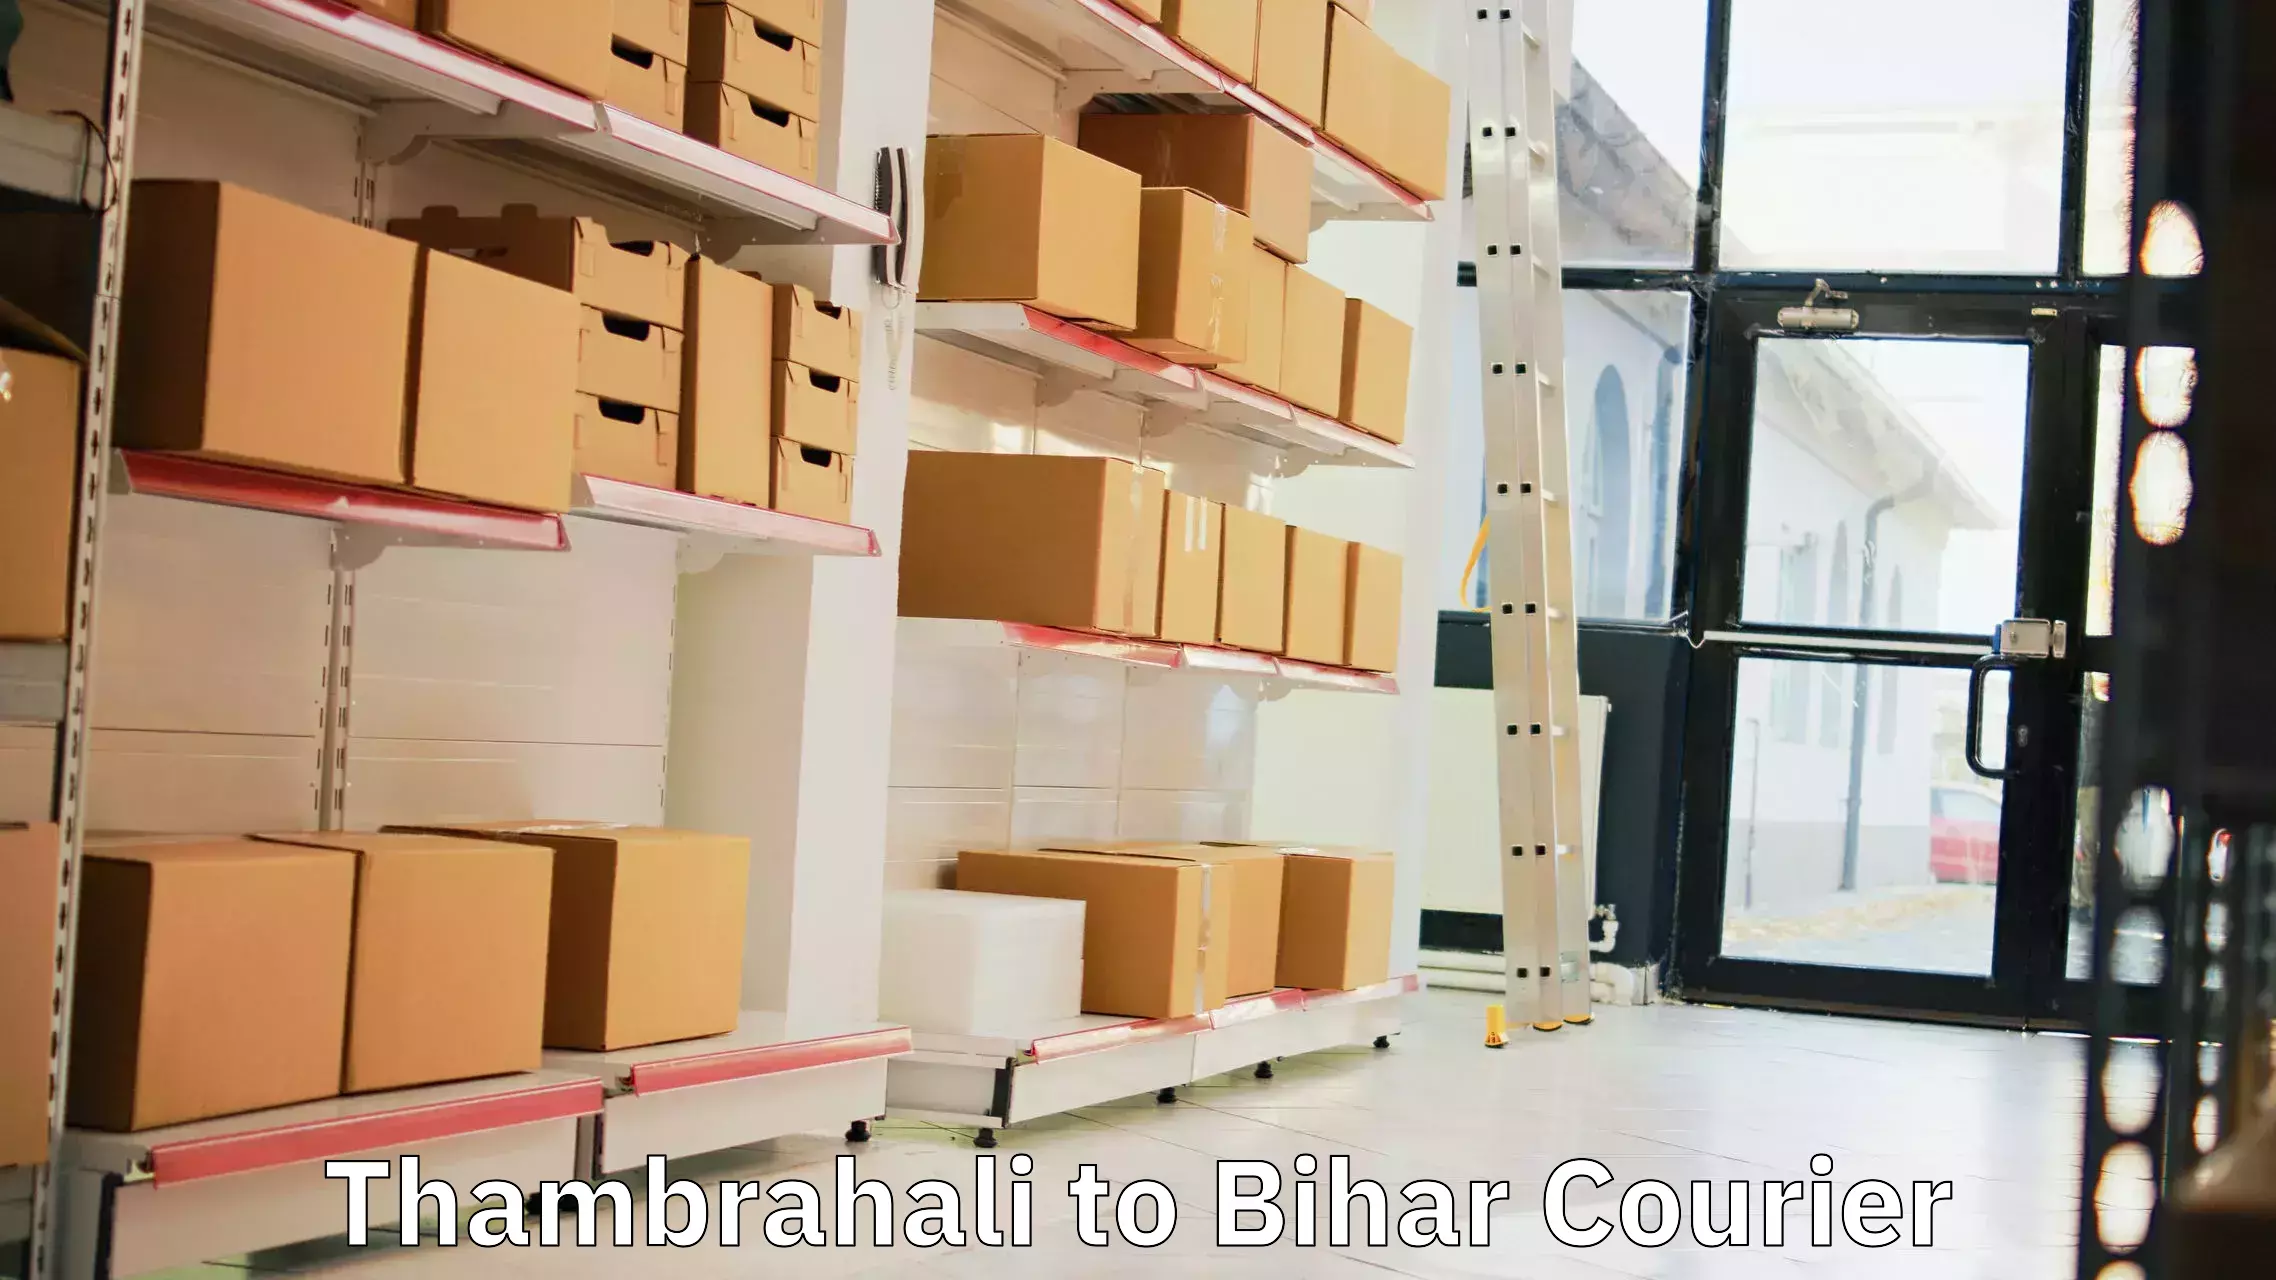 Courier services in Thambrahali to Bihar